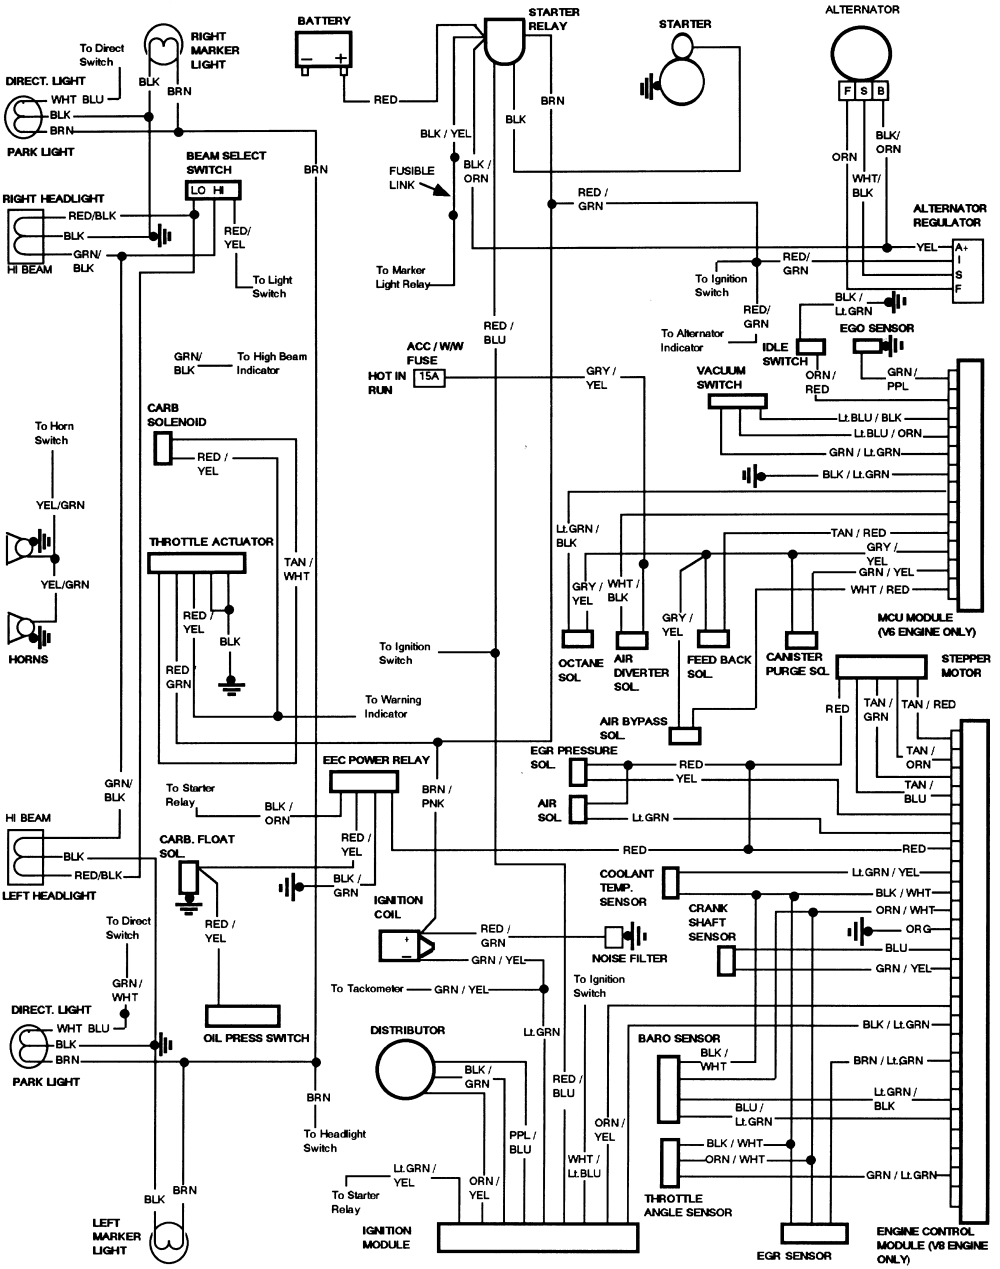 2003 Ford F150 Wiring Diagram from econtent.autozone.com